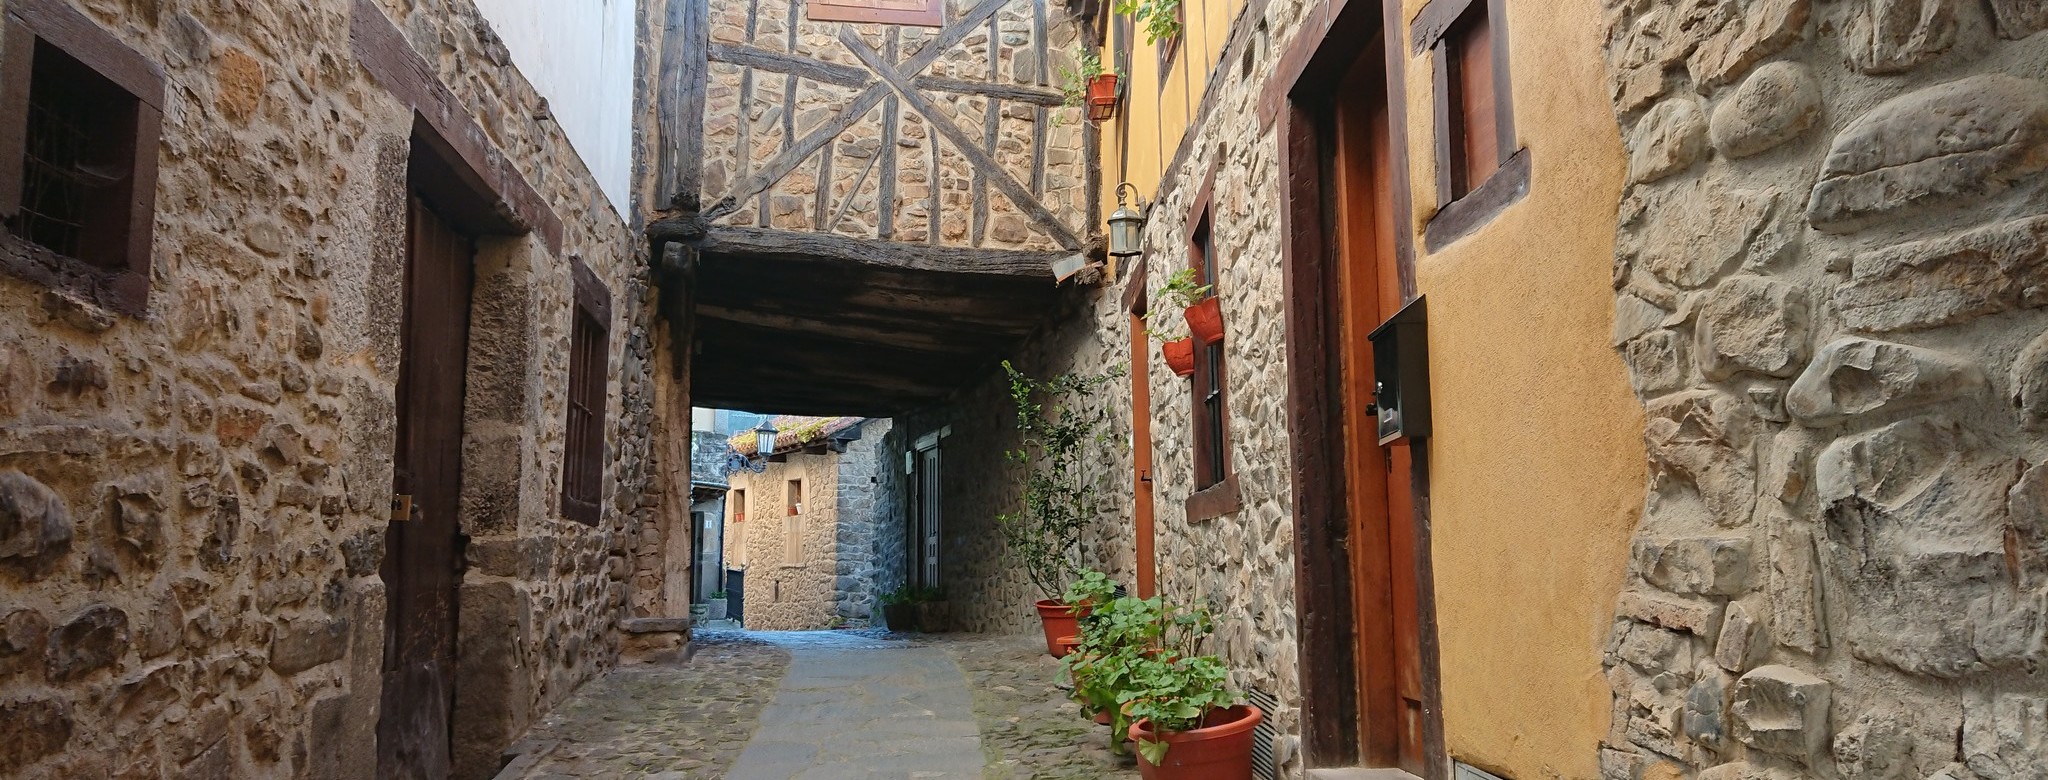 Gasse in Potes